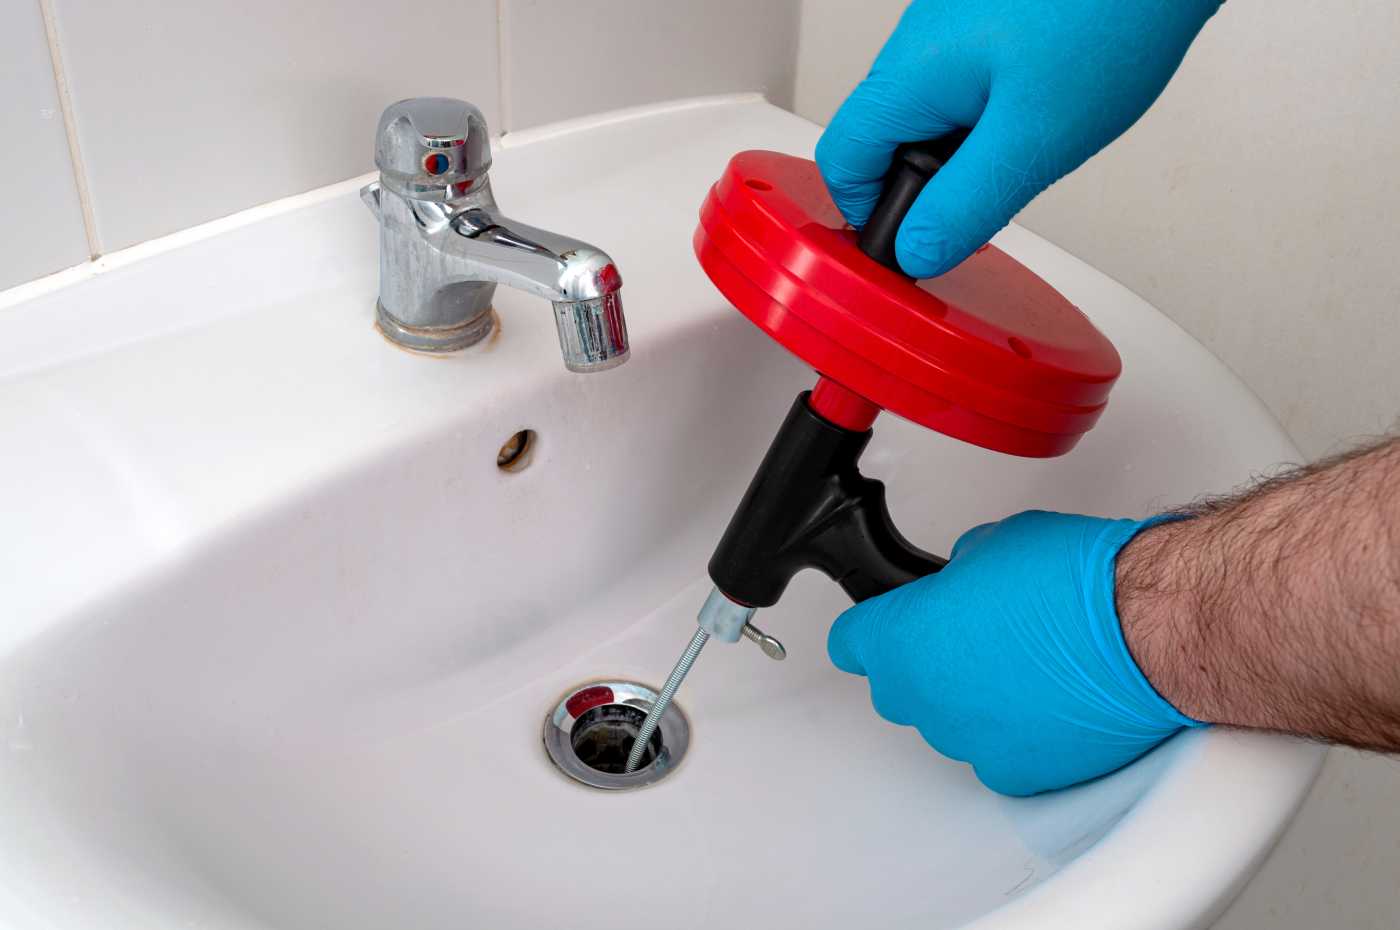 What to Do If the Plunger Doesn't Work